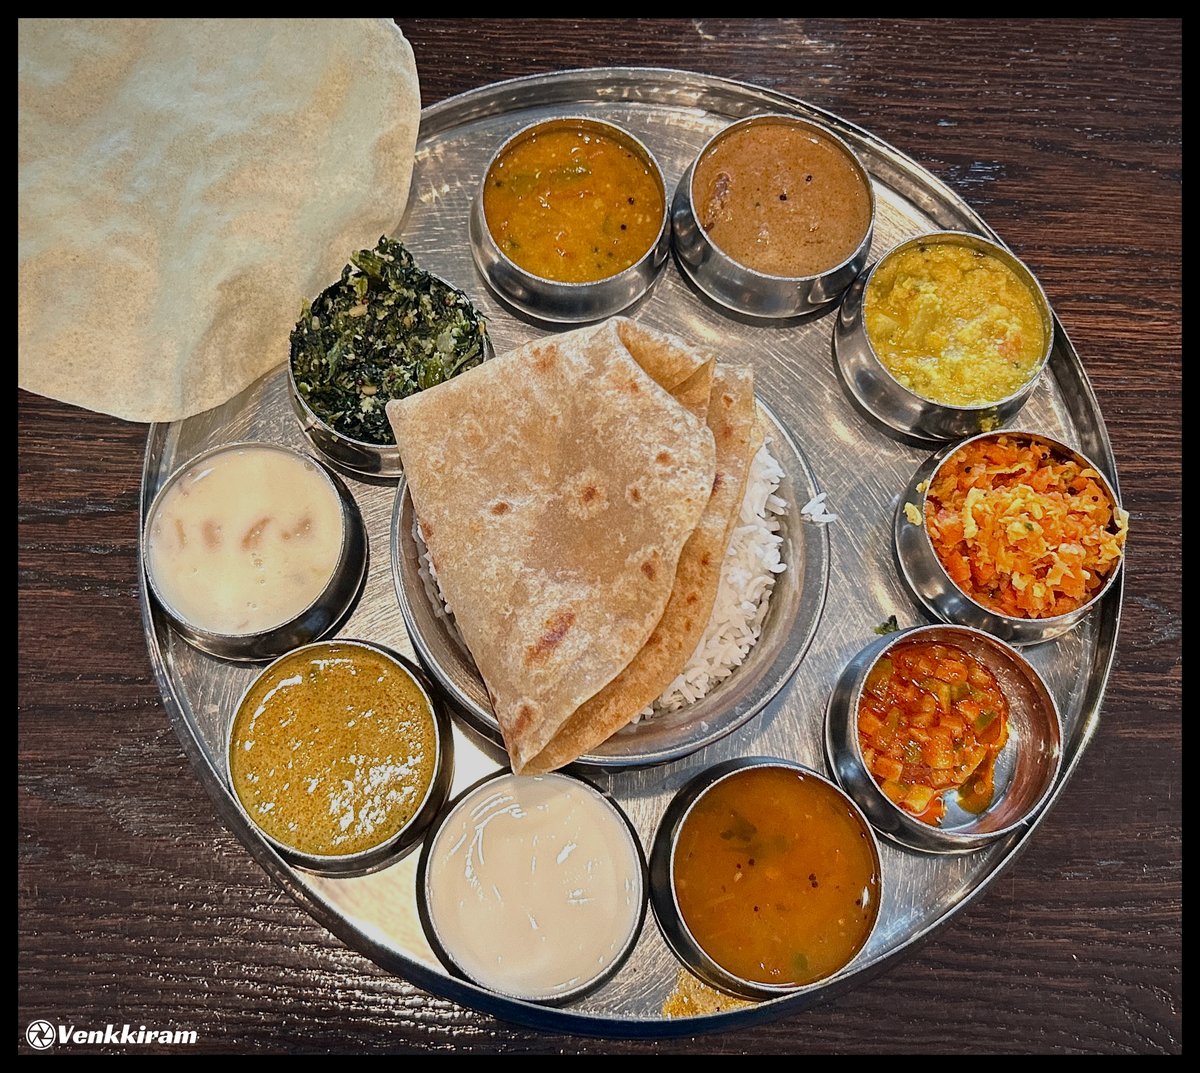 Drop the last food picture from your gallery. 😍📸

Mine, 👇

#southindianmeal #food #a2brestaurant #a2b #foodphotography #photography #venkkiclicks